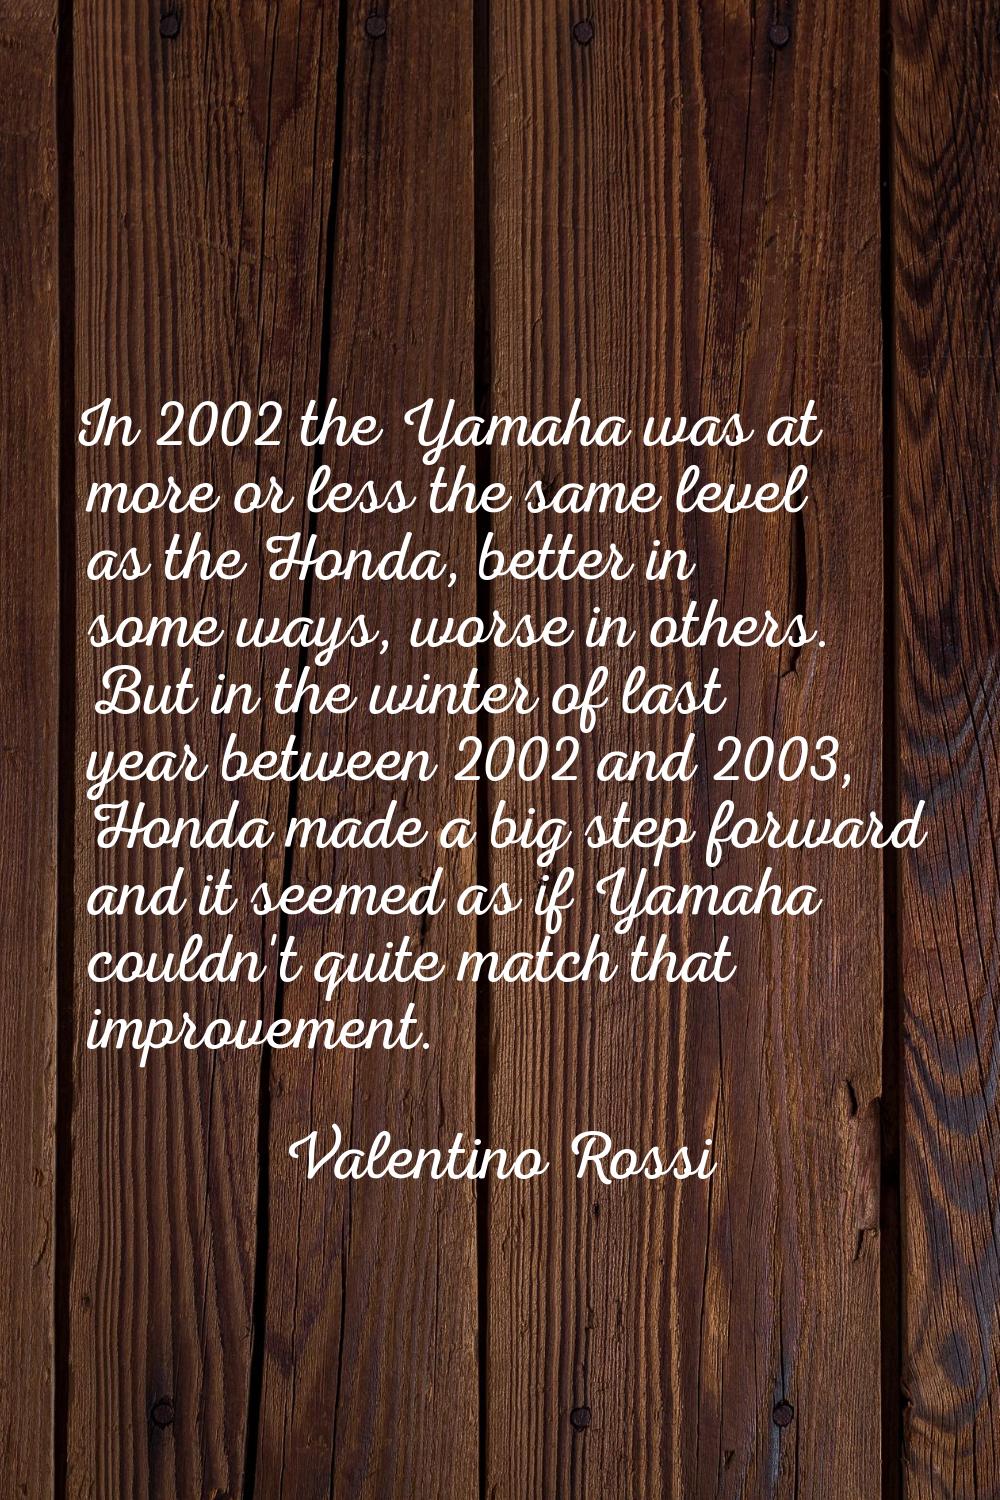 In 2002 the Yamaha was at more or less the same level as the Honda, better in some ways, worse in o